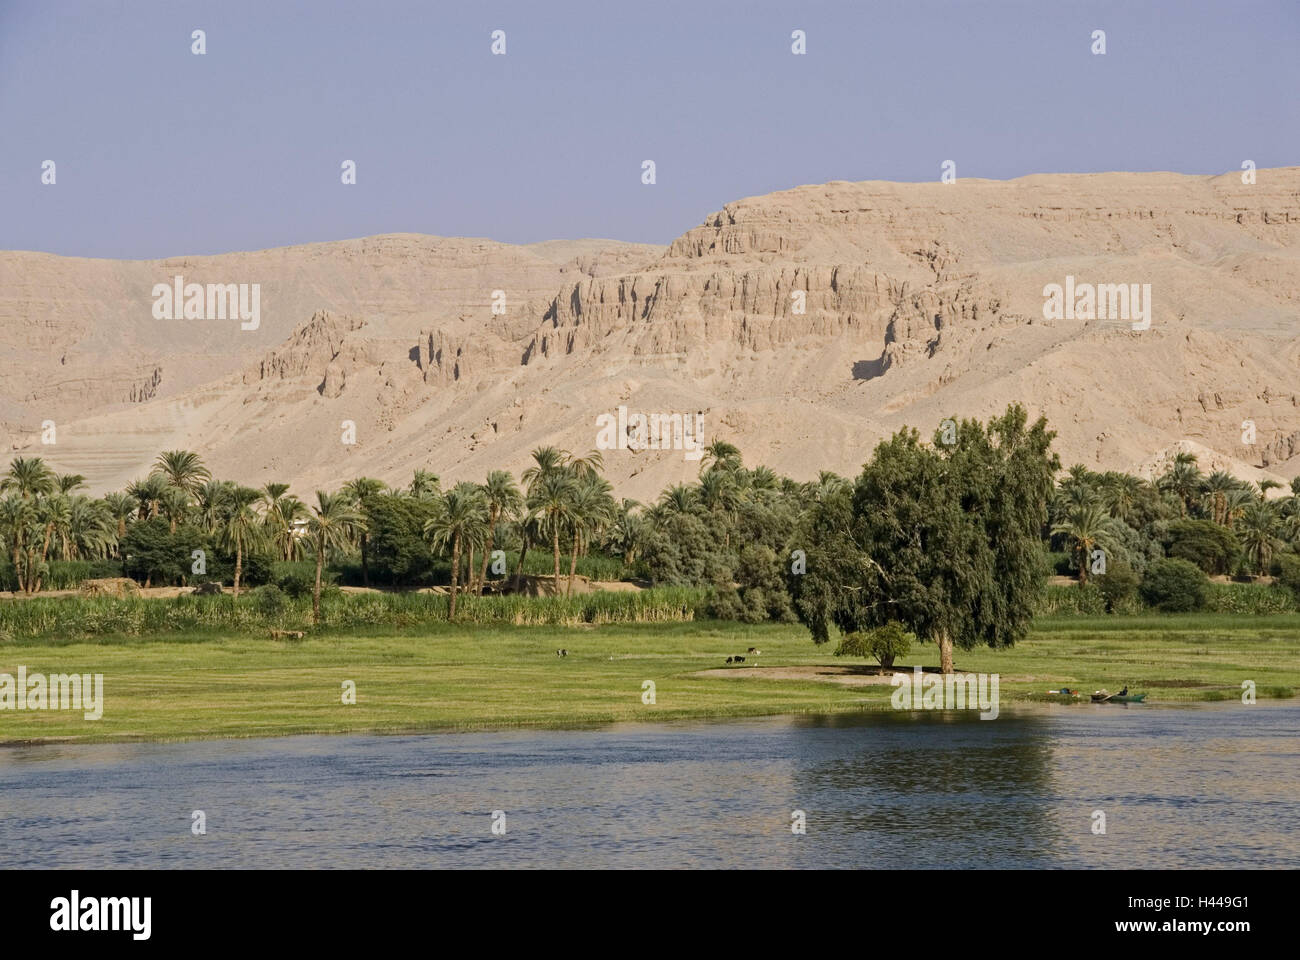 Egypt, Luxor, Nile scenery, Upper Egypt, scenery, mountains, rock, oasis, meadow, palms, the Nile, river, contrast, nature, Stock Photo